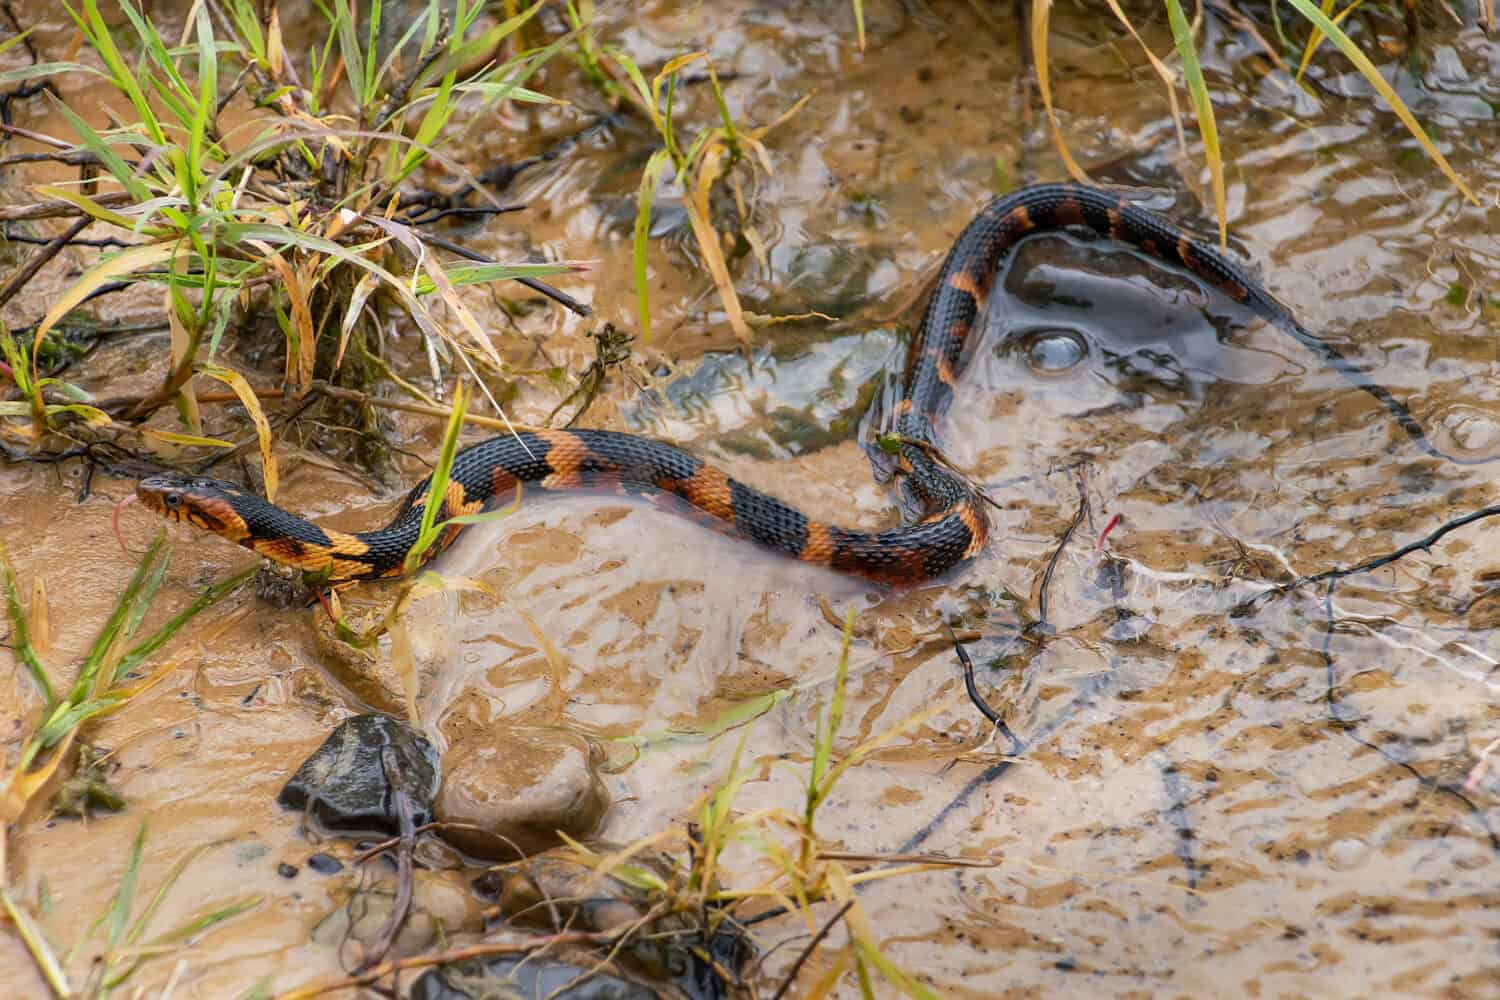 Broad-banded water snake also know as the broadband water snake